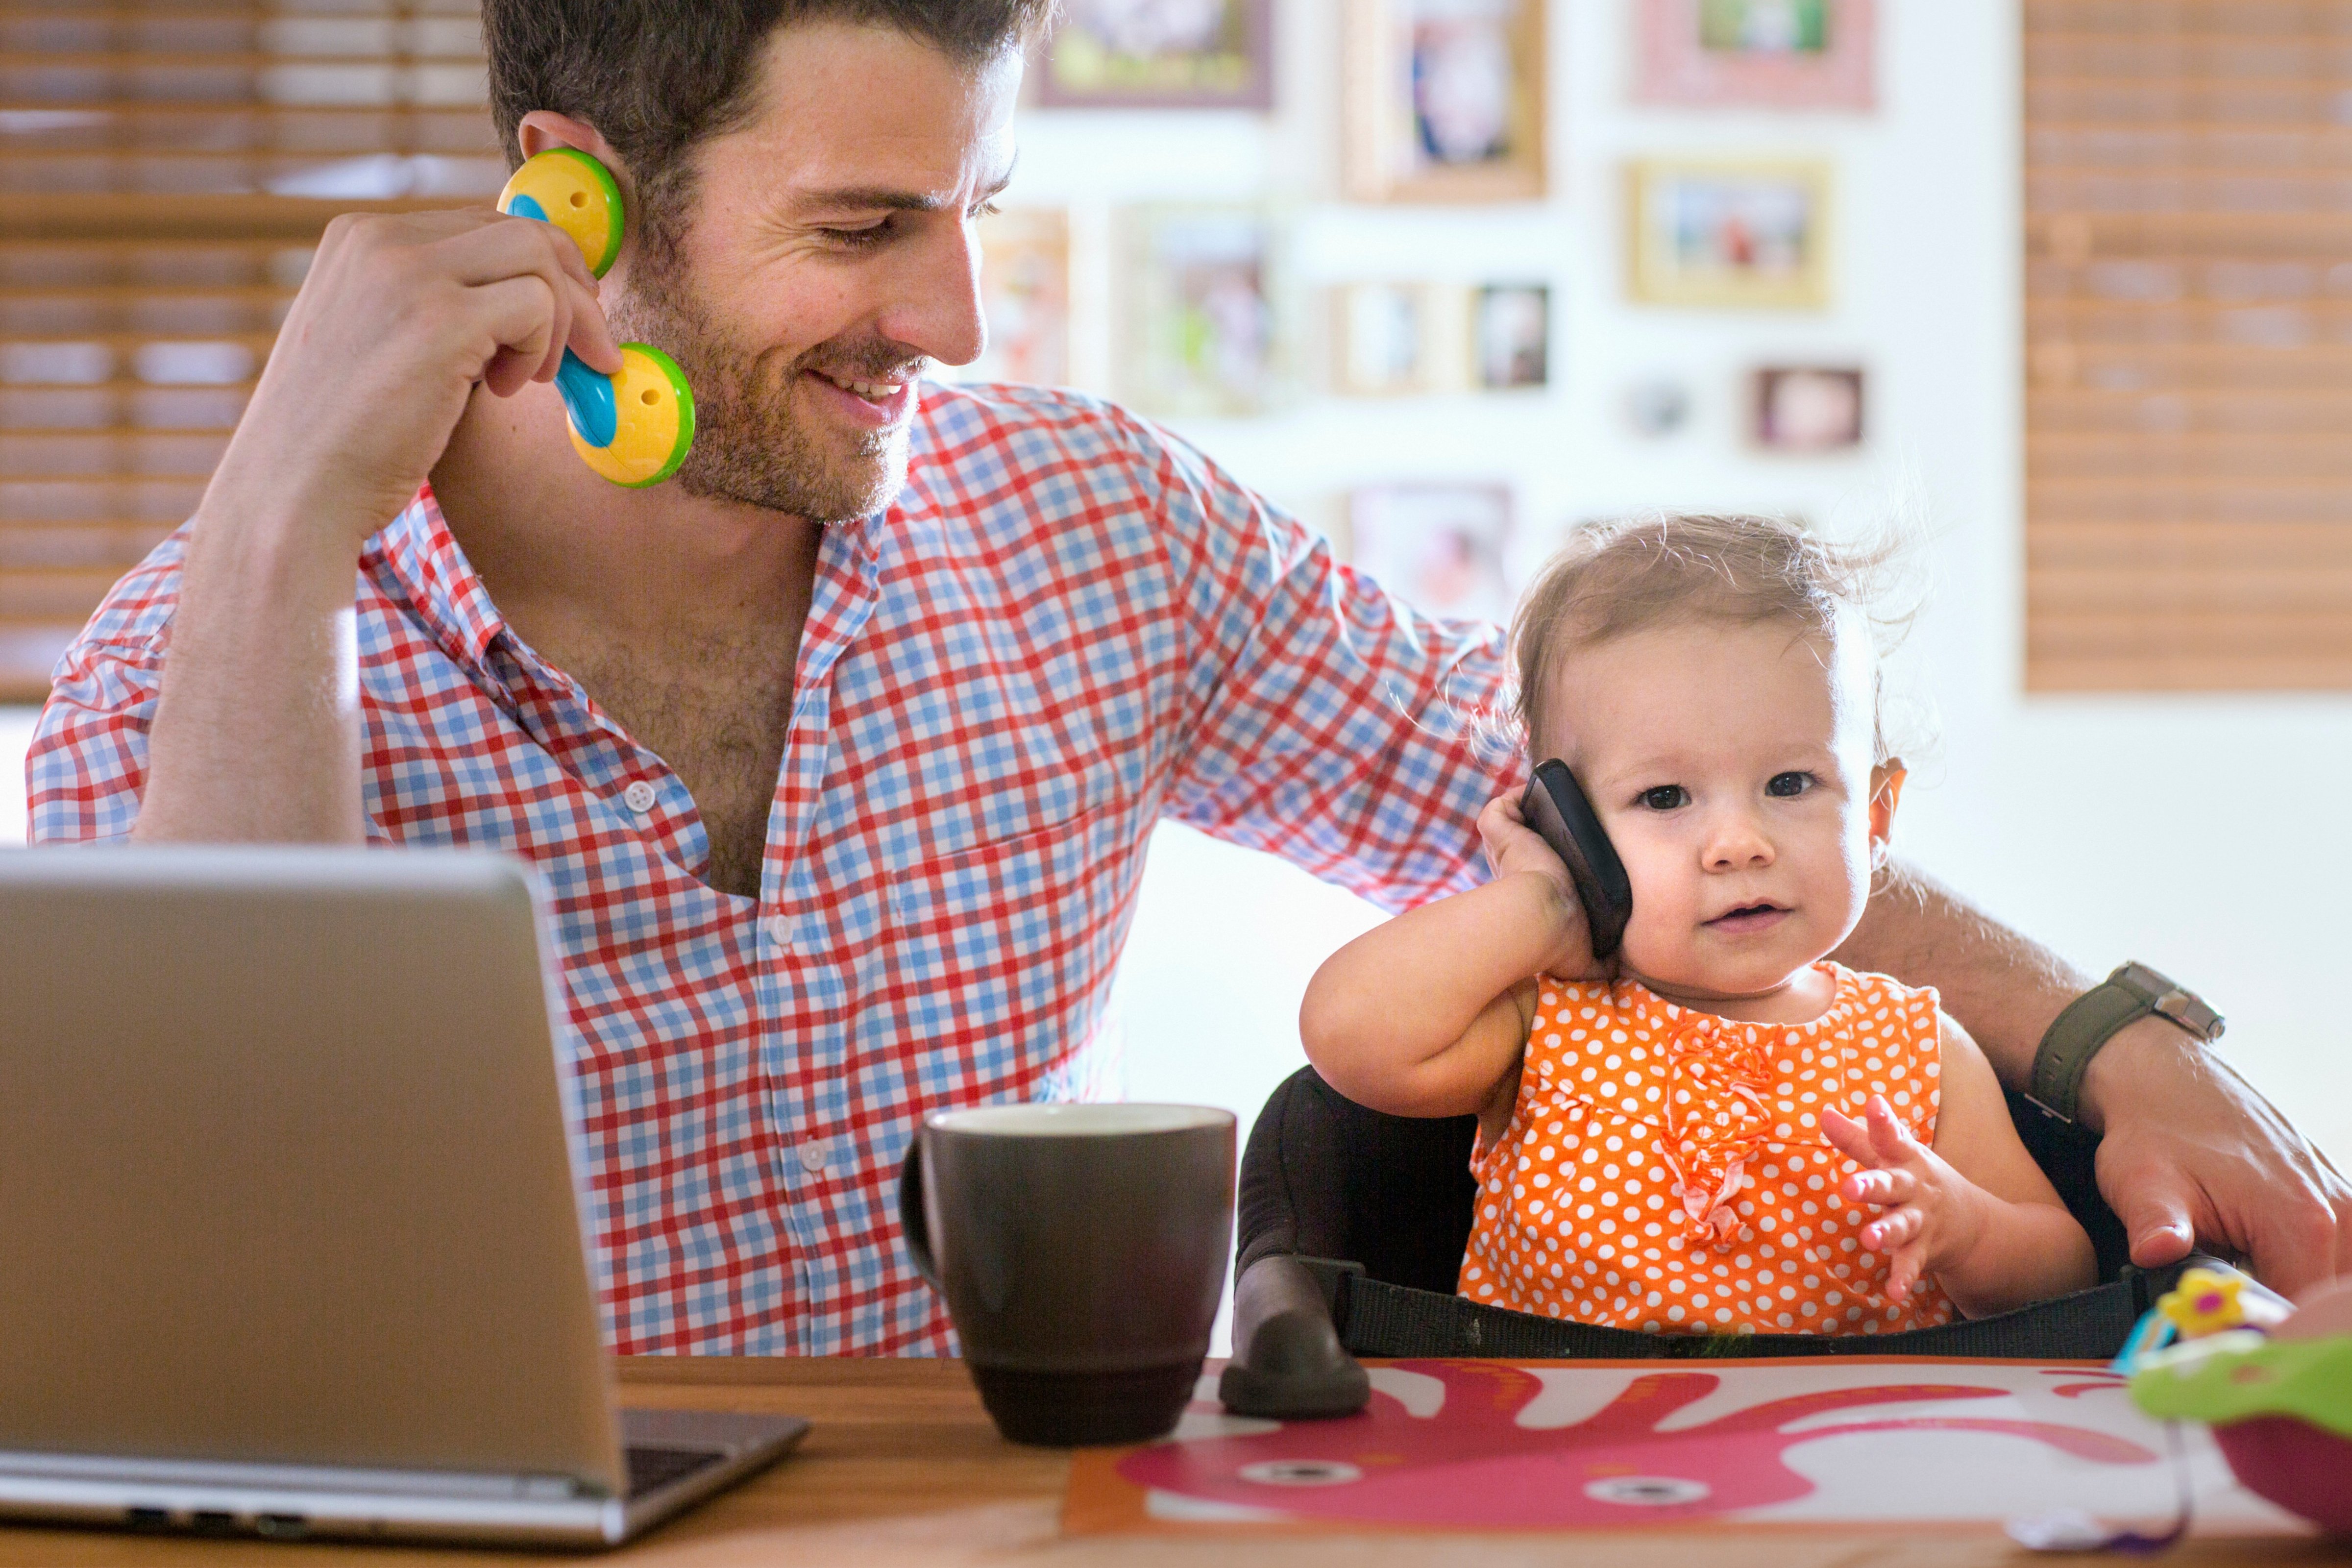 "Paternity leave is not only good for families, it’s good for business." (Chad Springer—Getty Images/Image Source)